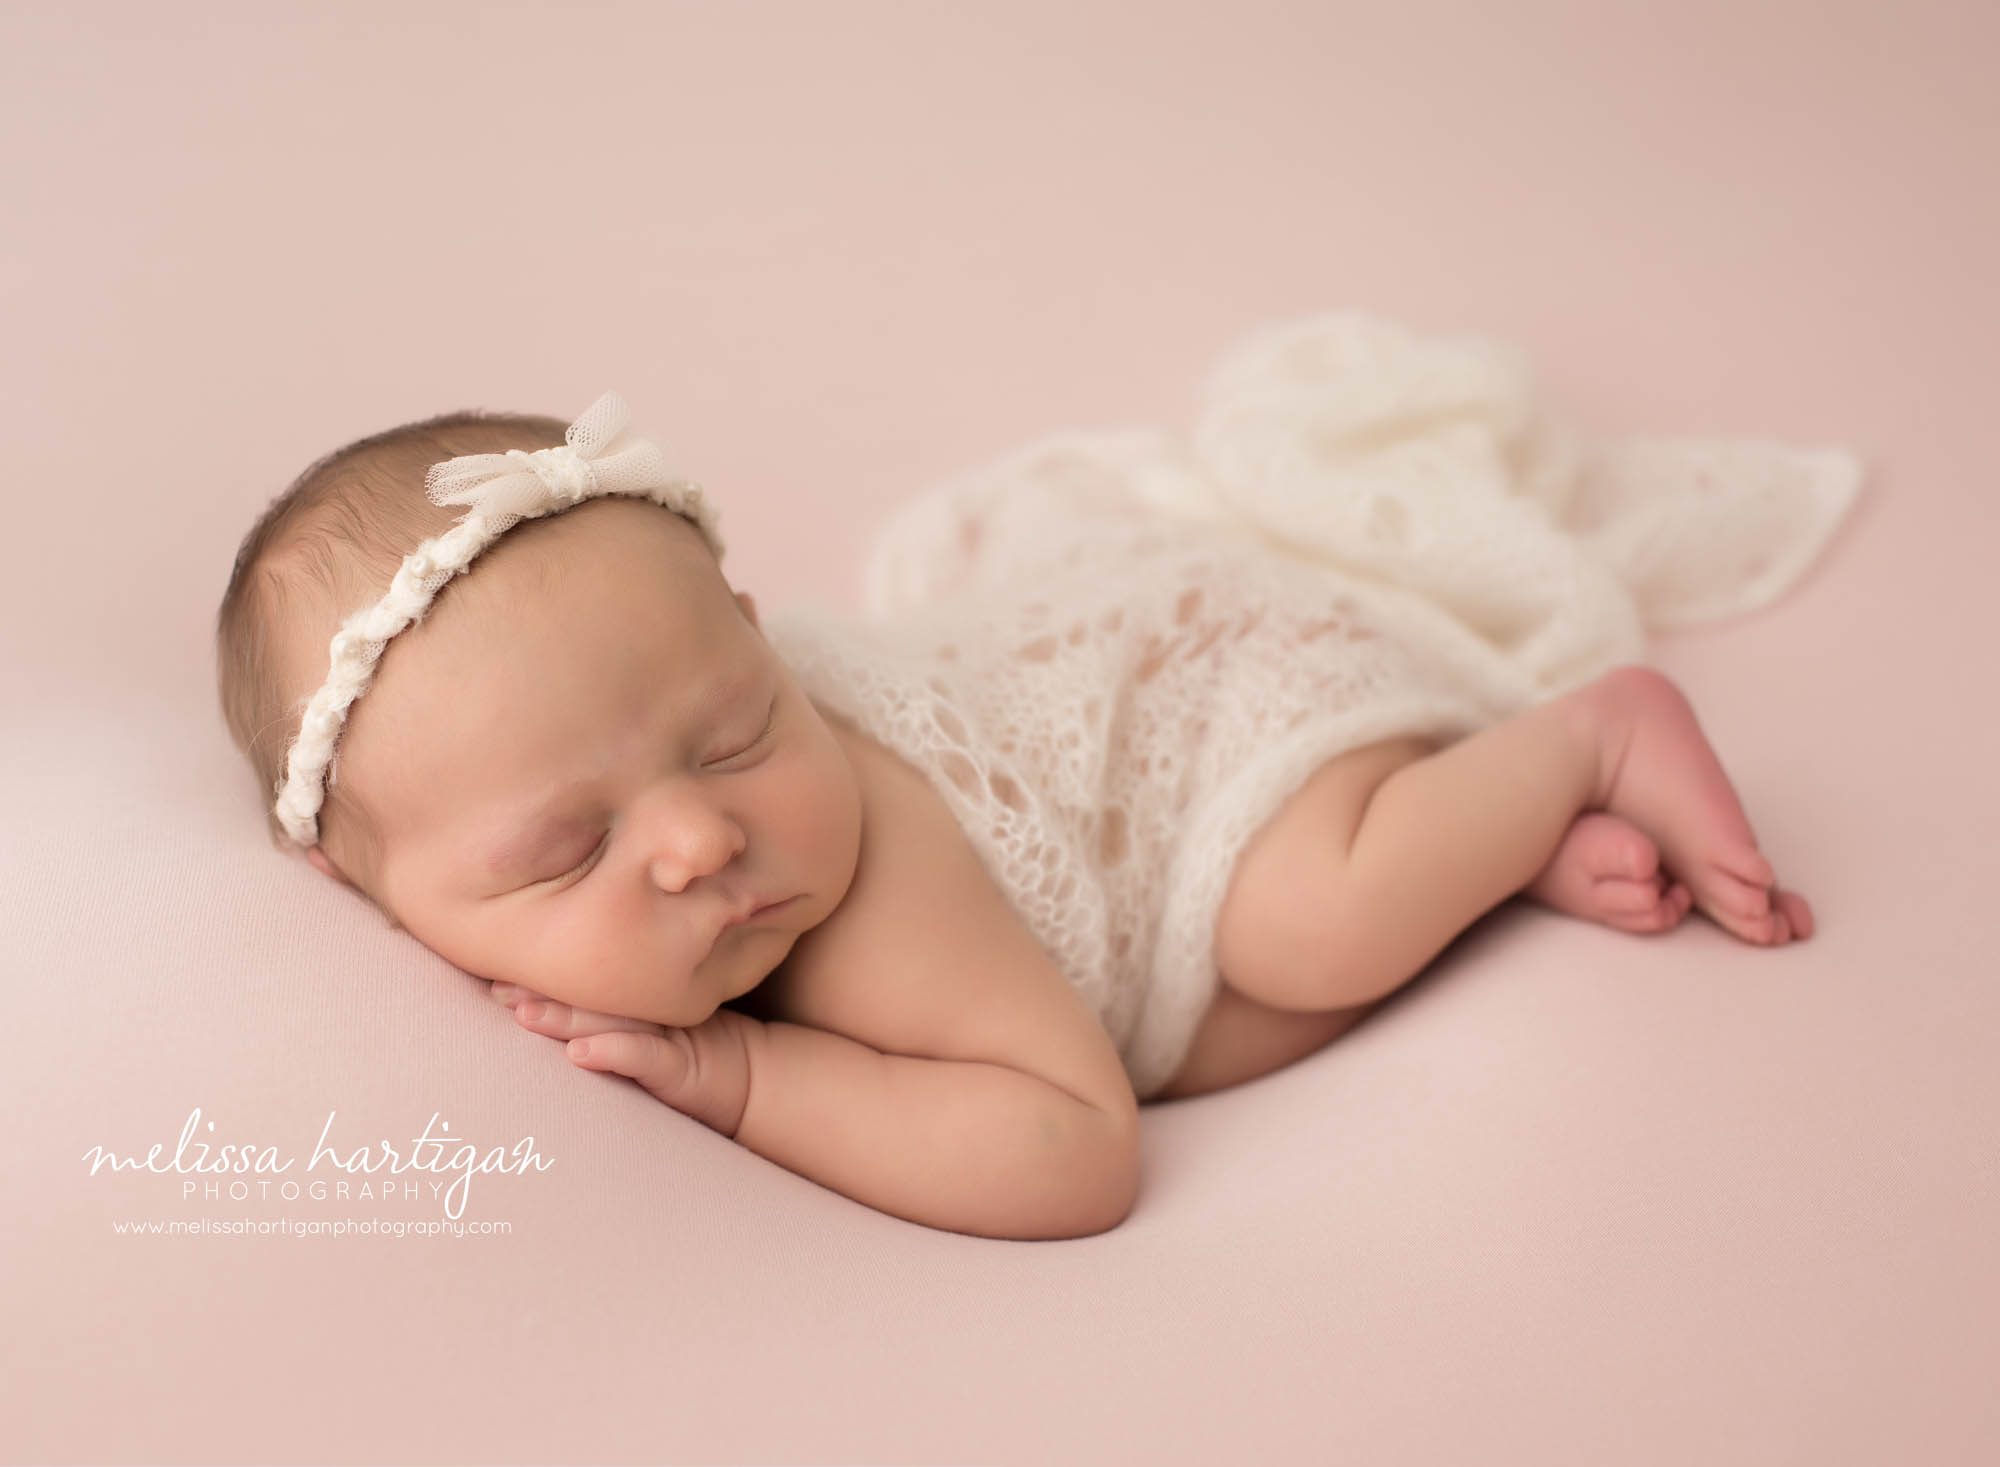 newborn baby girl posed on pink backdrop with cream knit wrap wearing bow headband